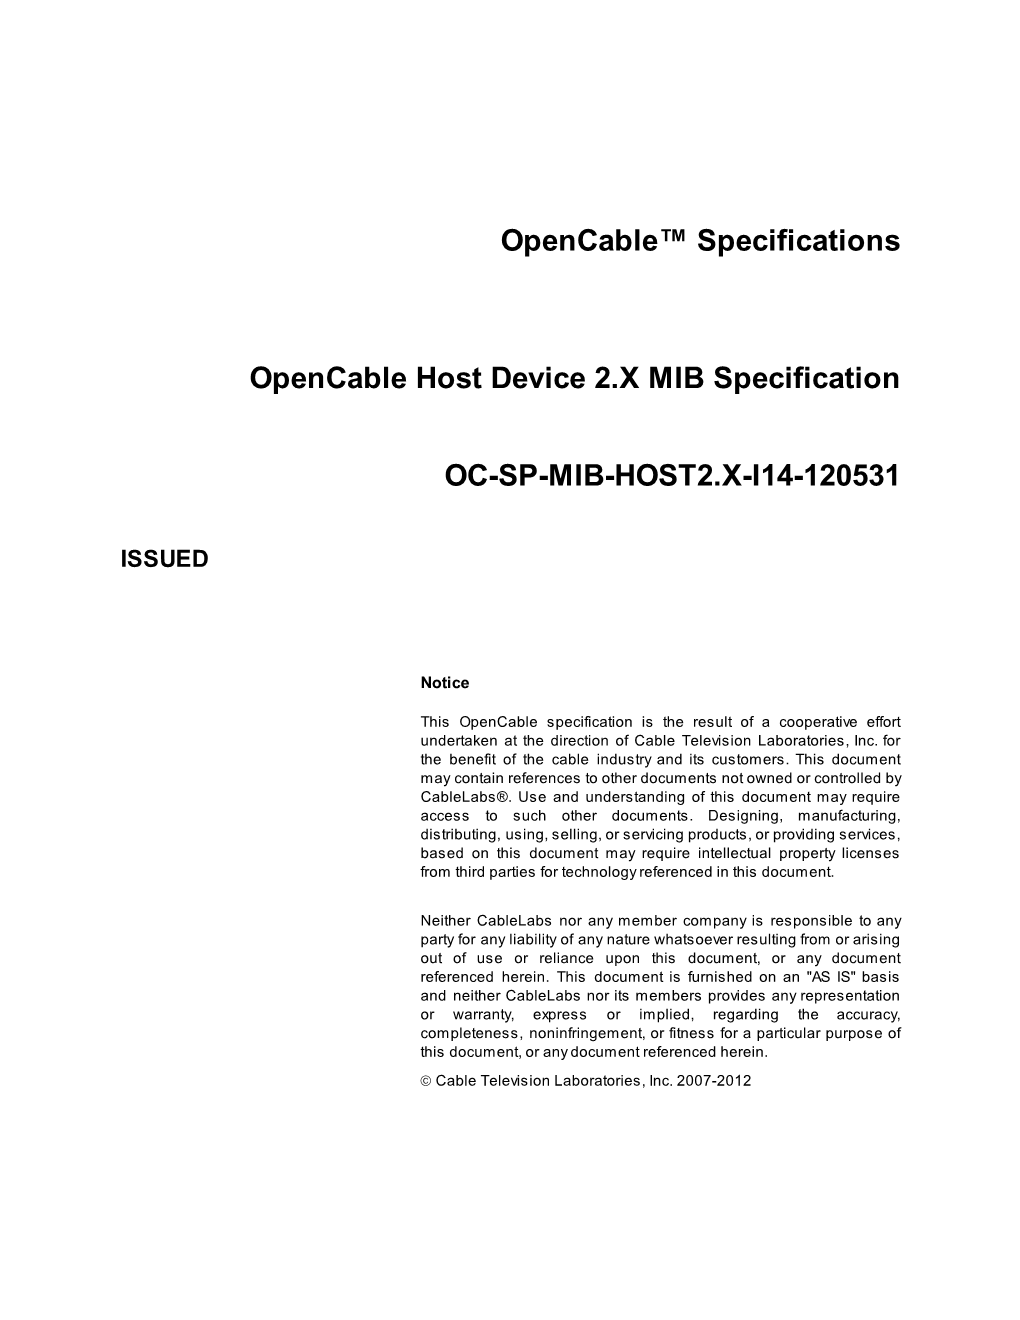 Opencable™ Specifications Opencable Host Device 2.X MIB Specification OC-SP-MIB-HOST2.X-I14-120531